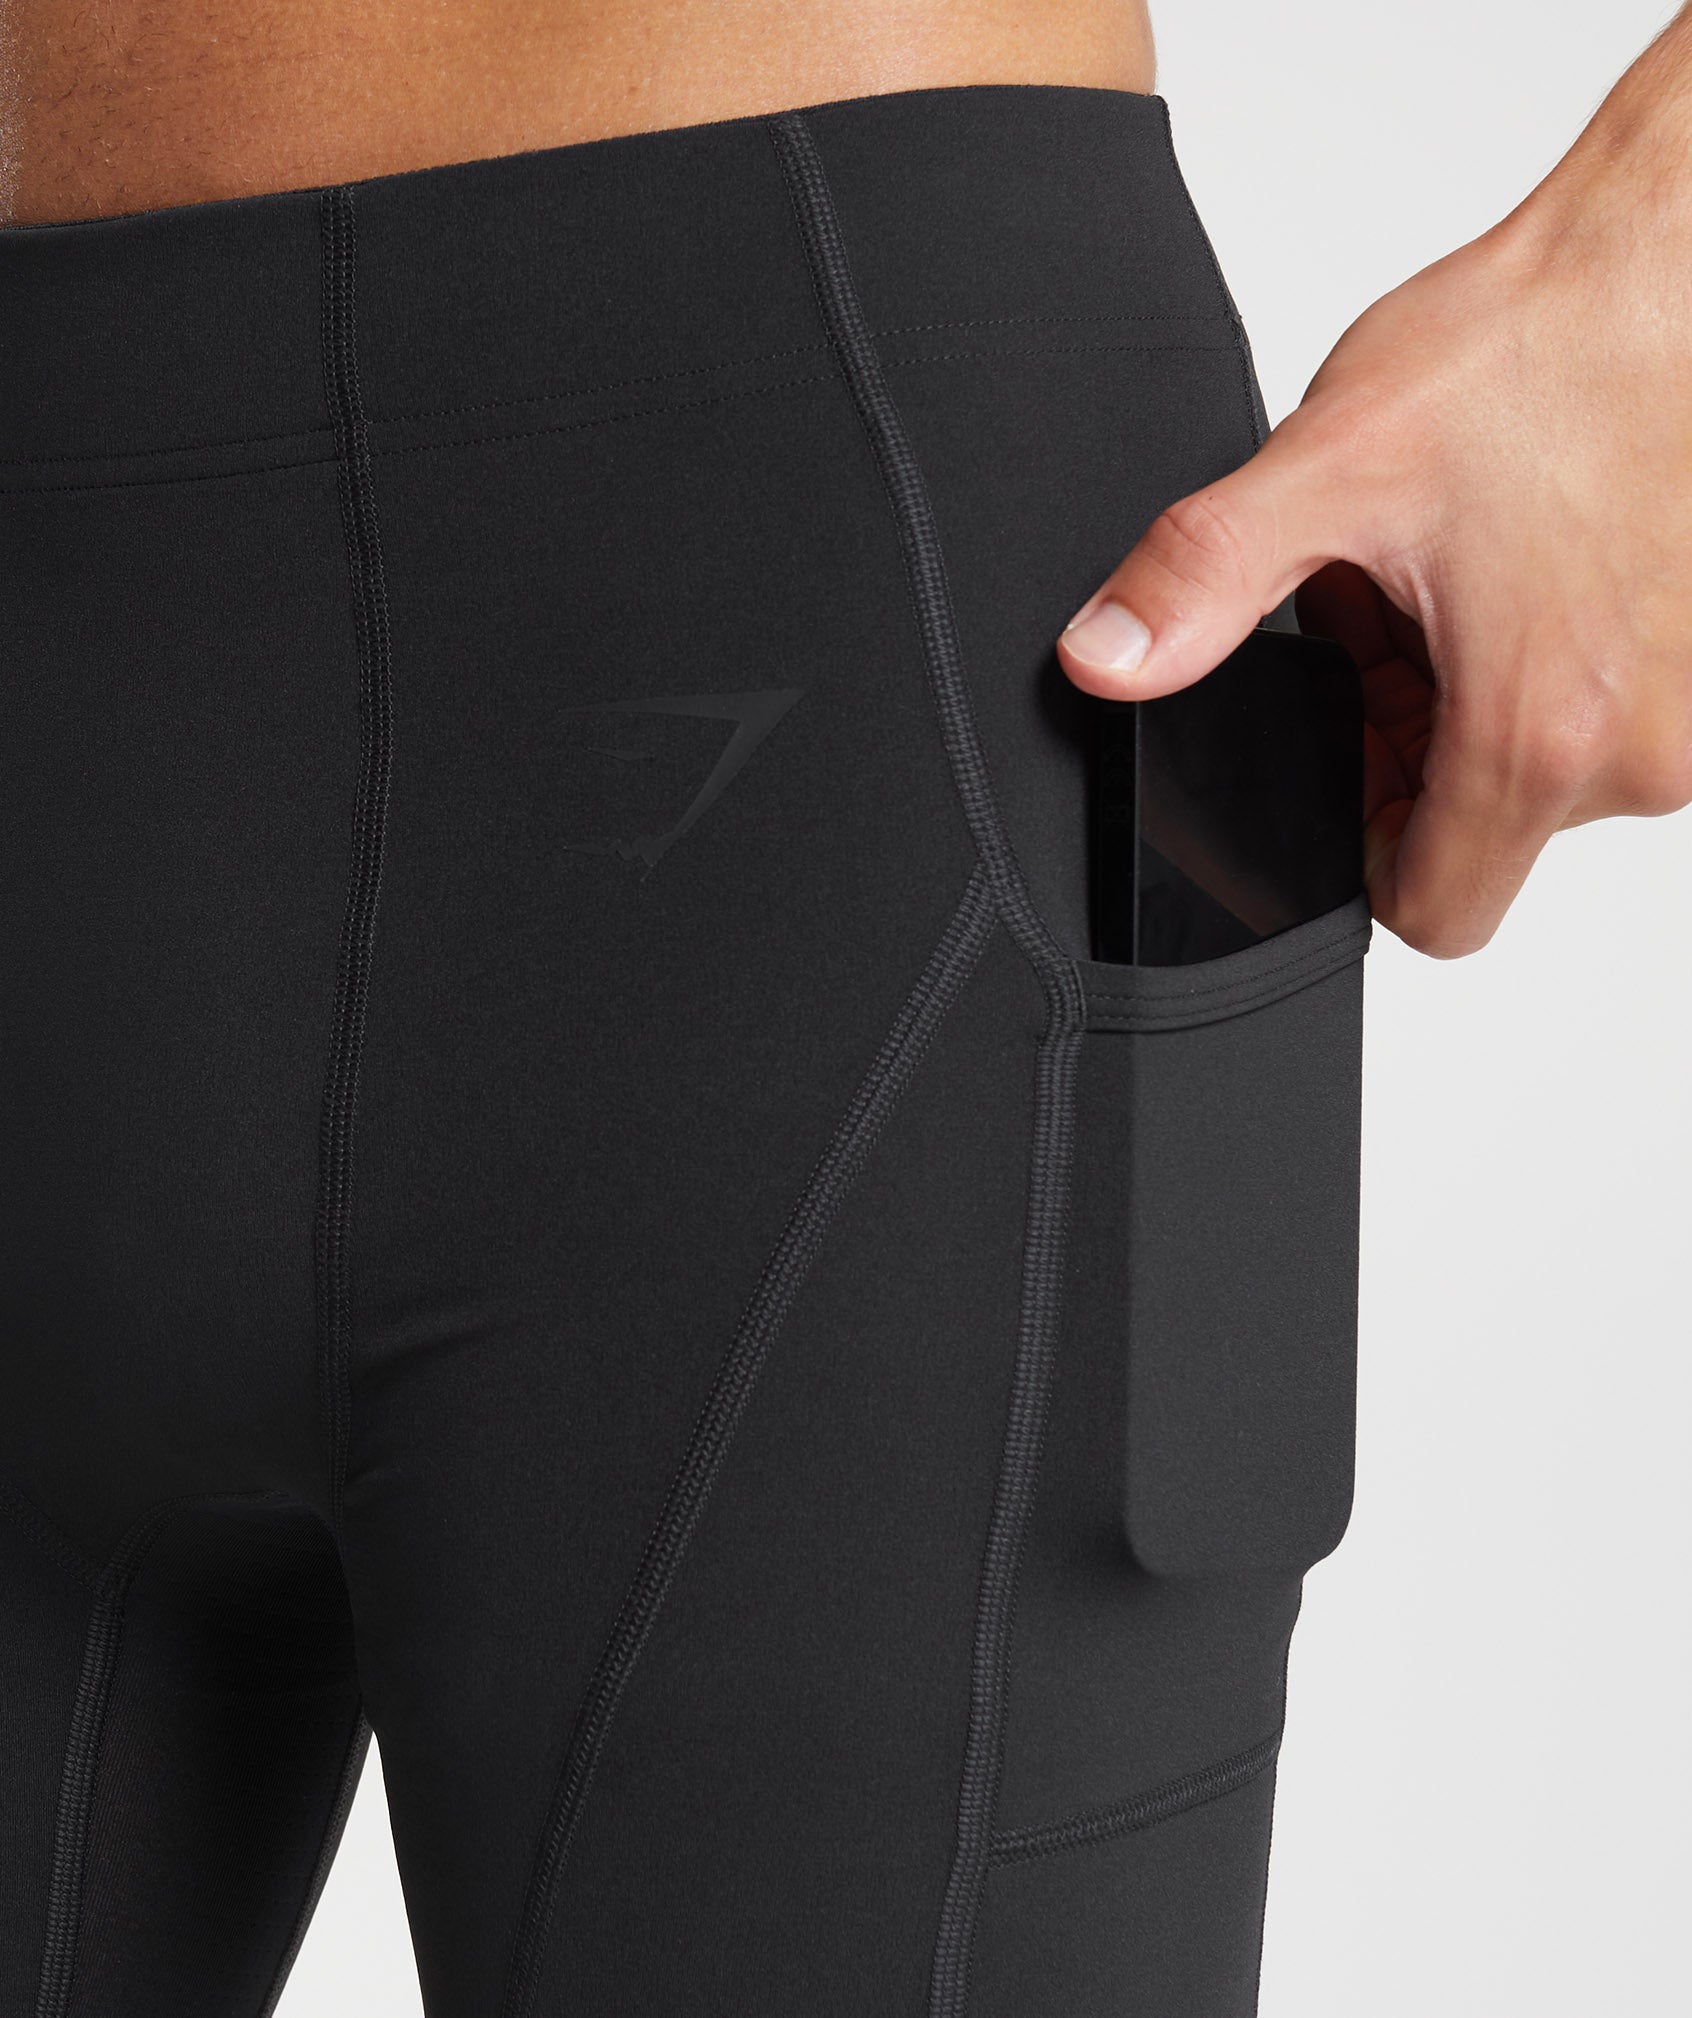 Control Baselayer Shorts in Black - view 6